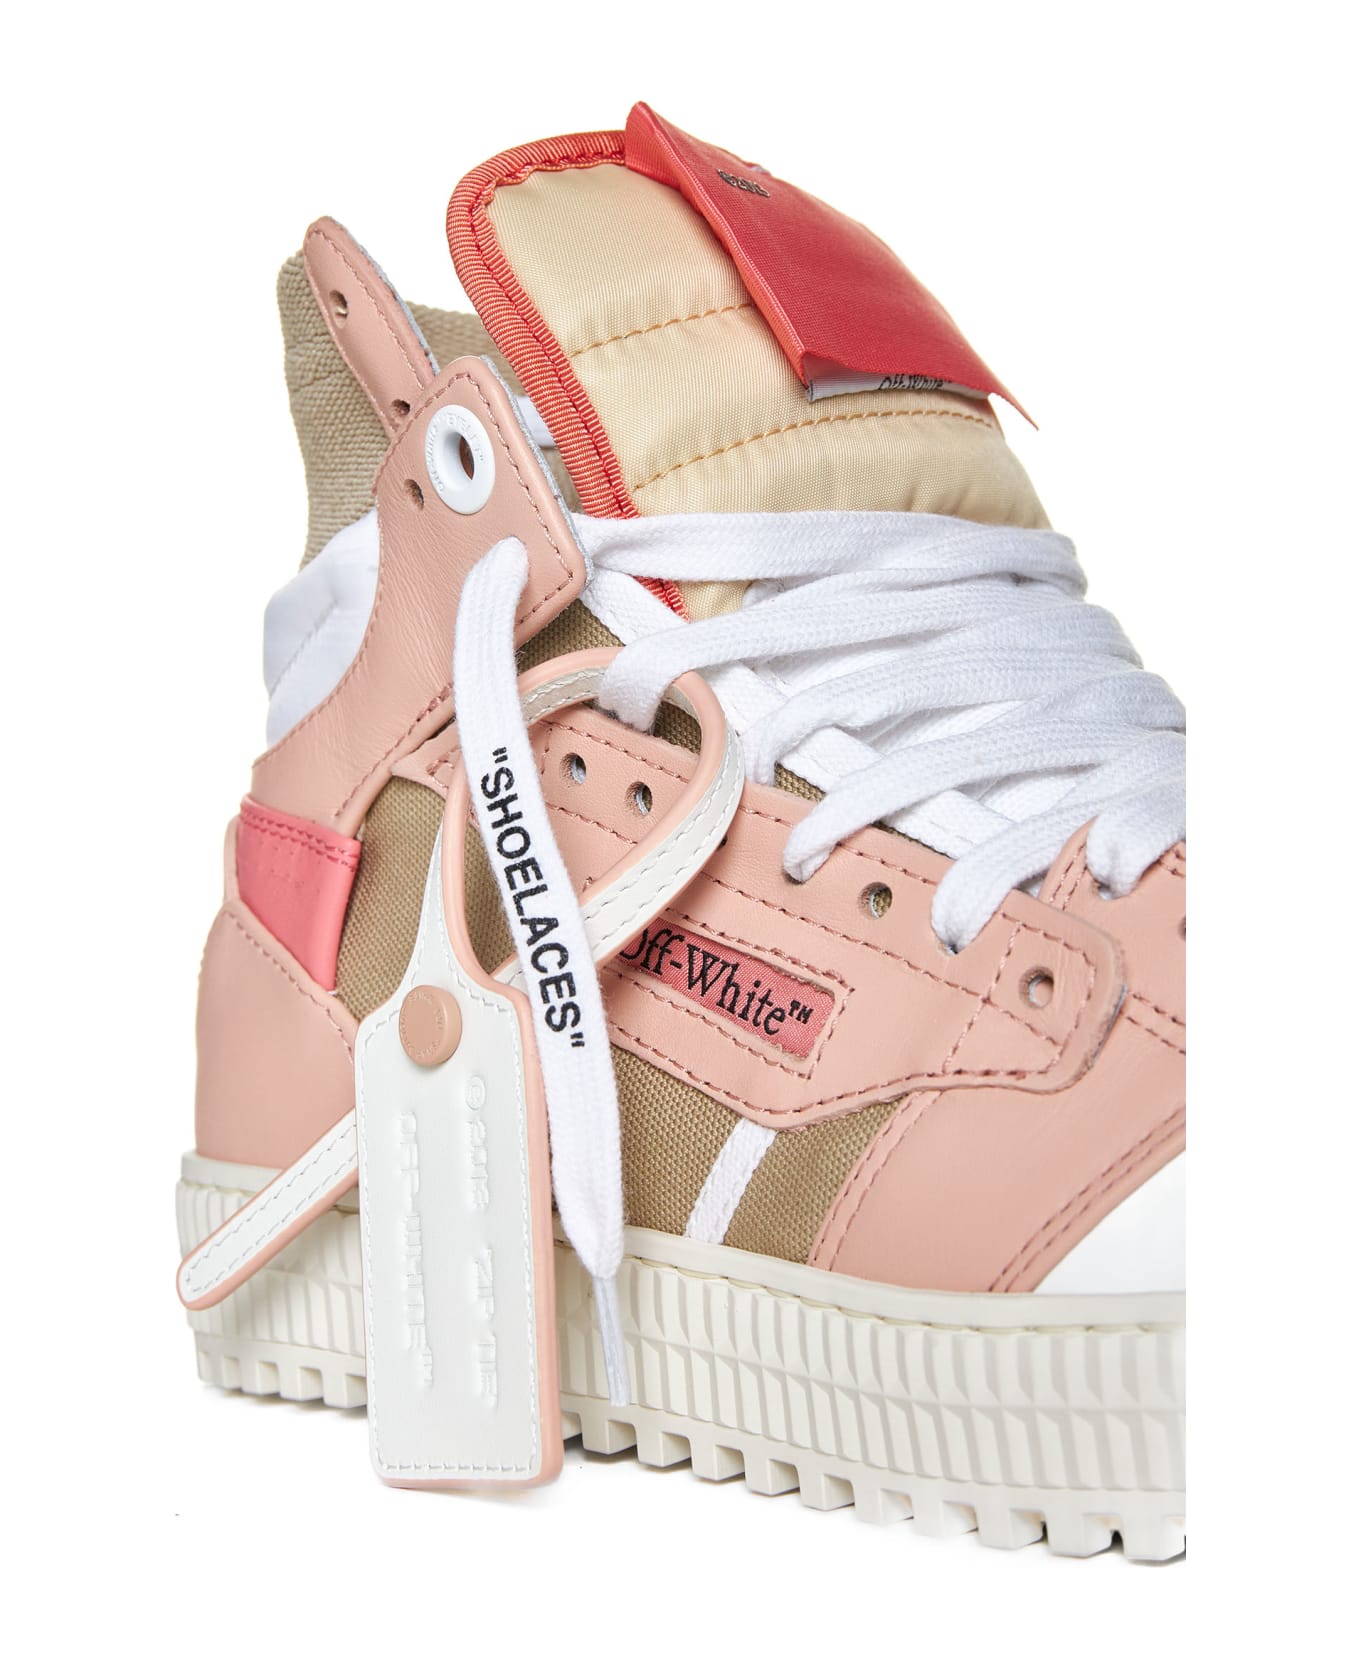 Off-White 3.0 Off Court Sneakers - Pink